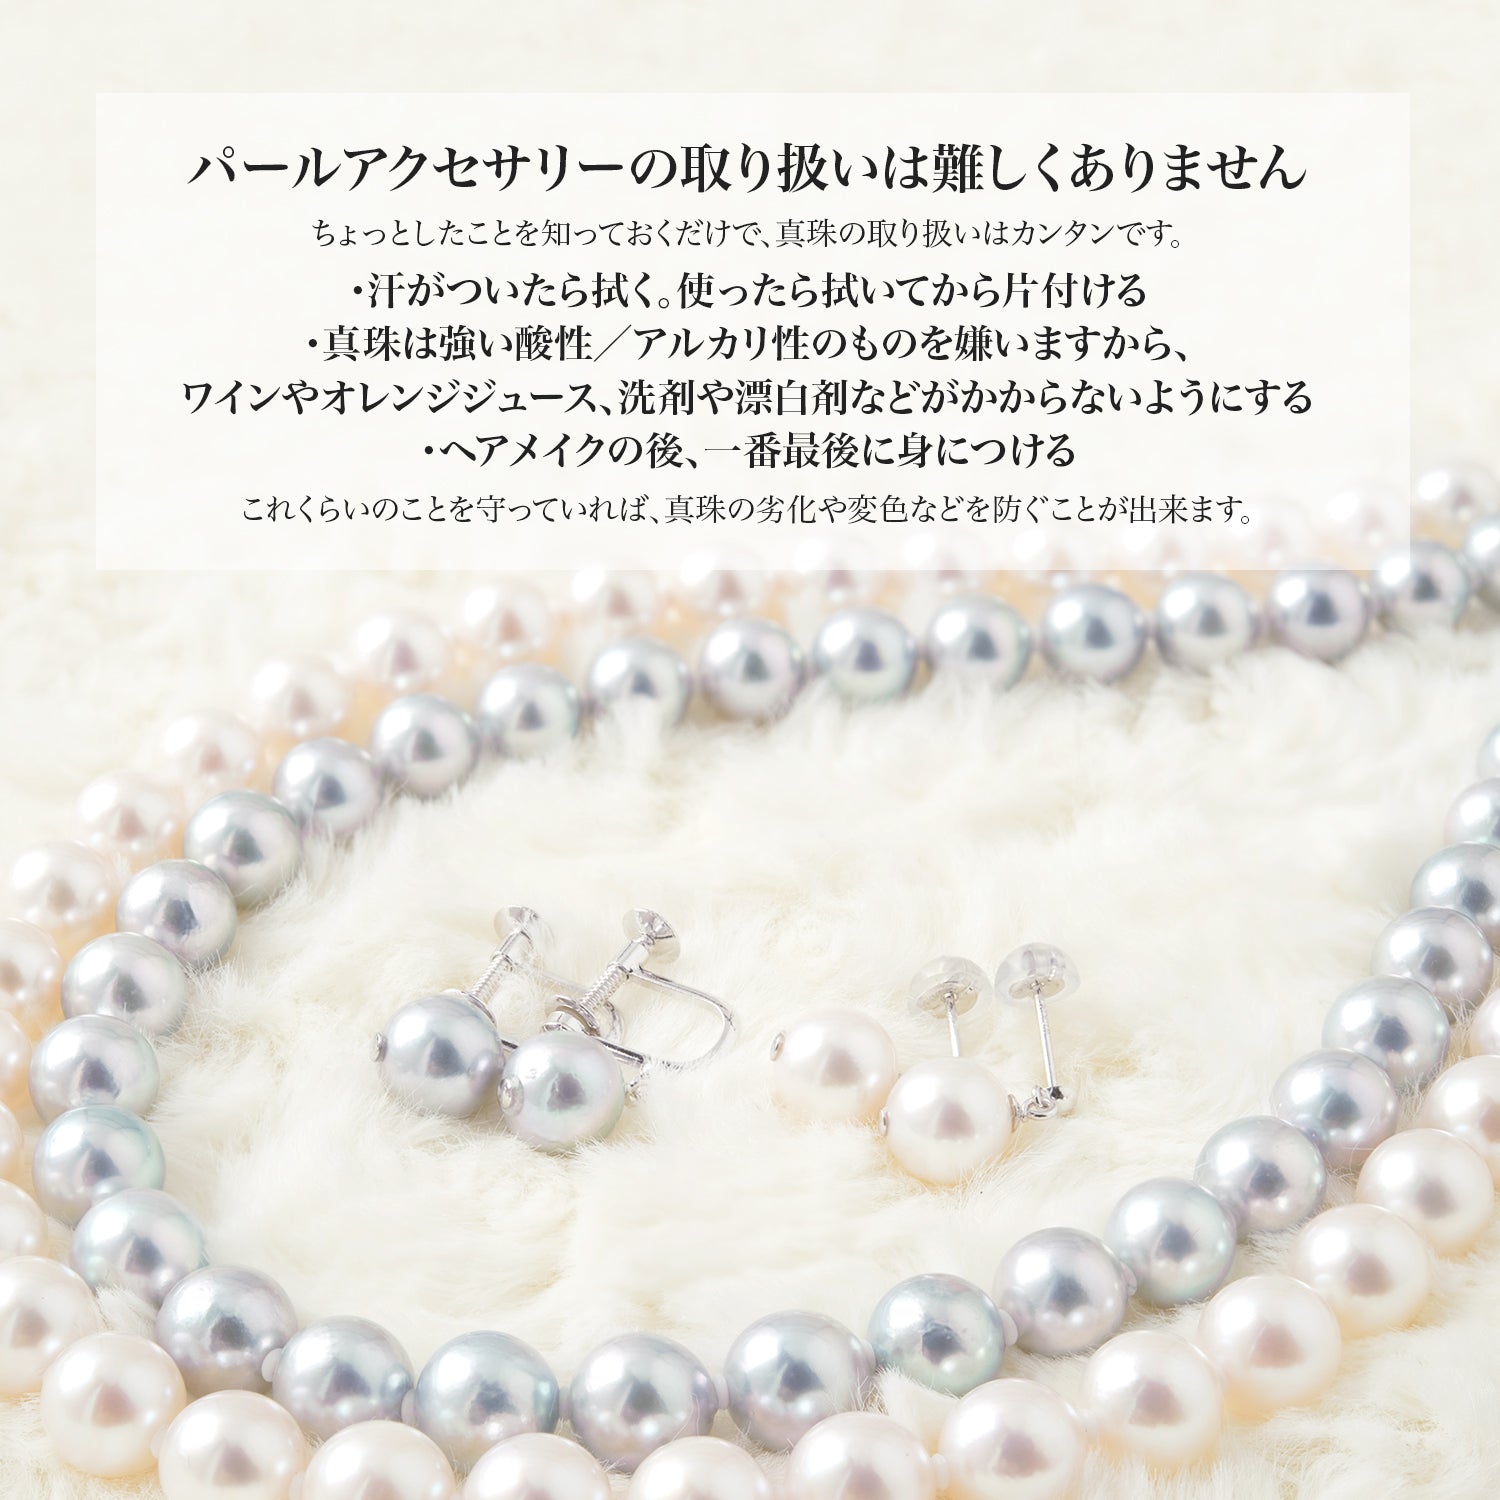 Hanadama Pearl Formal Necklace Set of 2 [8.0-8.5mm] (Earrings included) Formal Set with Certificate of Authenticity and Storage Case for Ceremonial Occasions